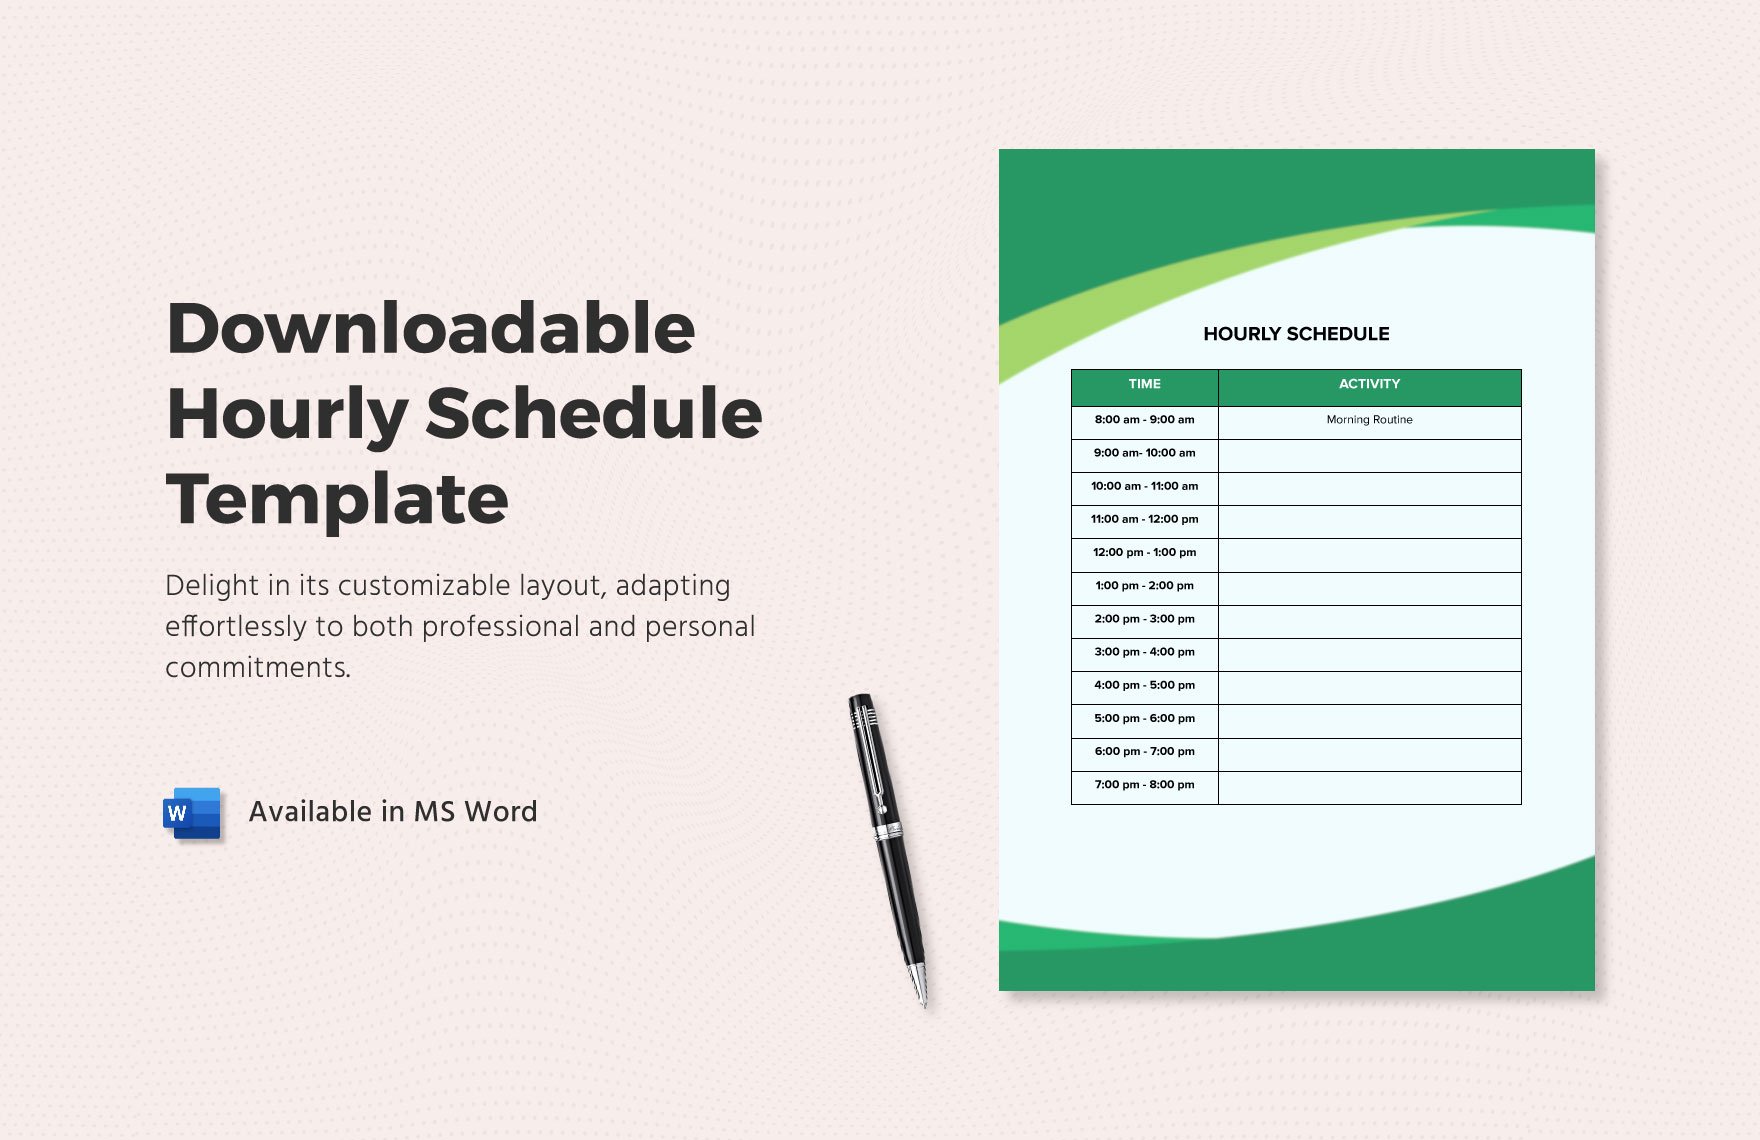 Downloadable Hourly Schedule Template